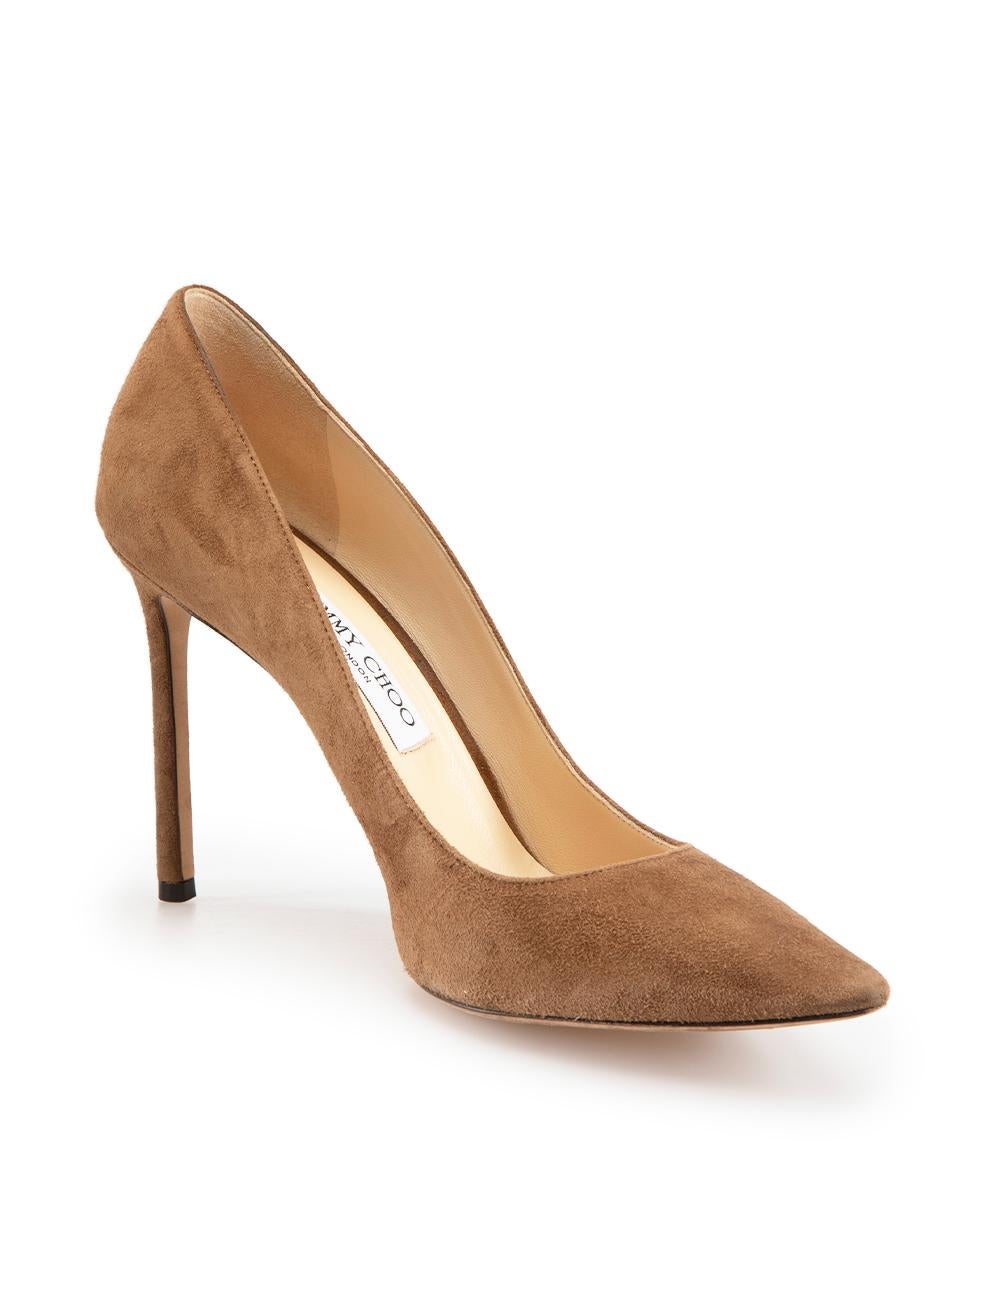 CONDITION is Very good. Minimal wear to shoes is evident. Minimal wear to the right-side of right shoe with light mark to the suede on this used Jimmy Choo designer resale item. These shoes come with original box.

Details
Brown
Suede
Pumps
Point